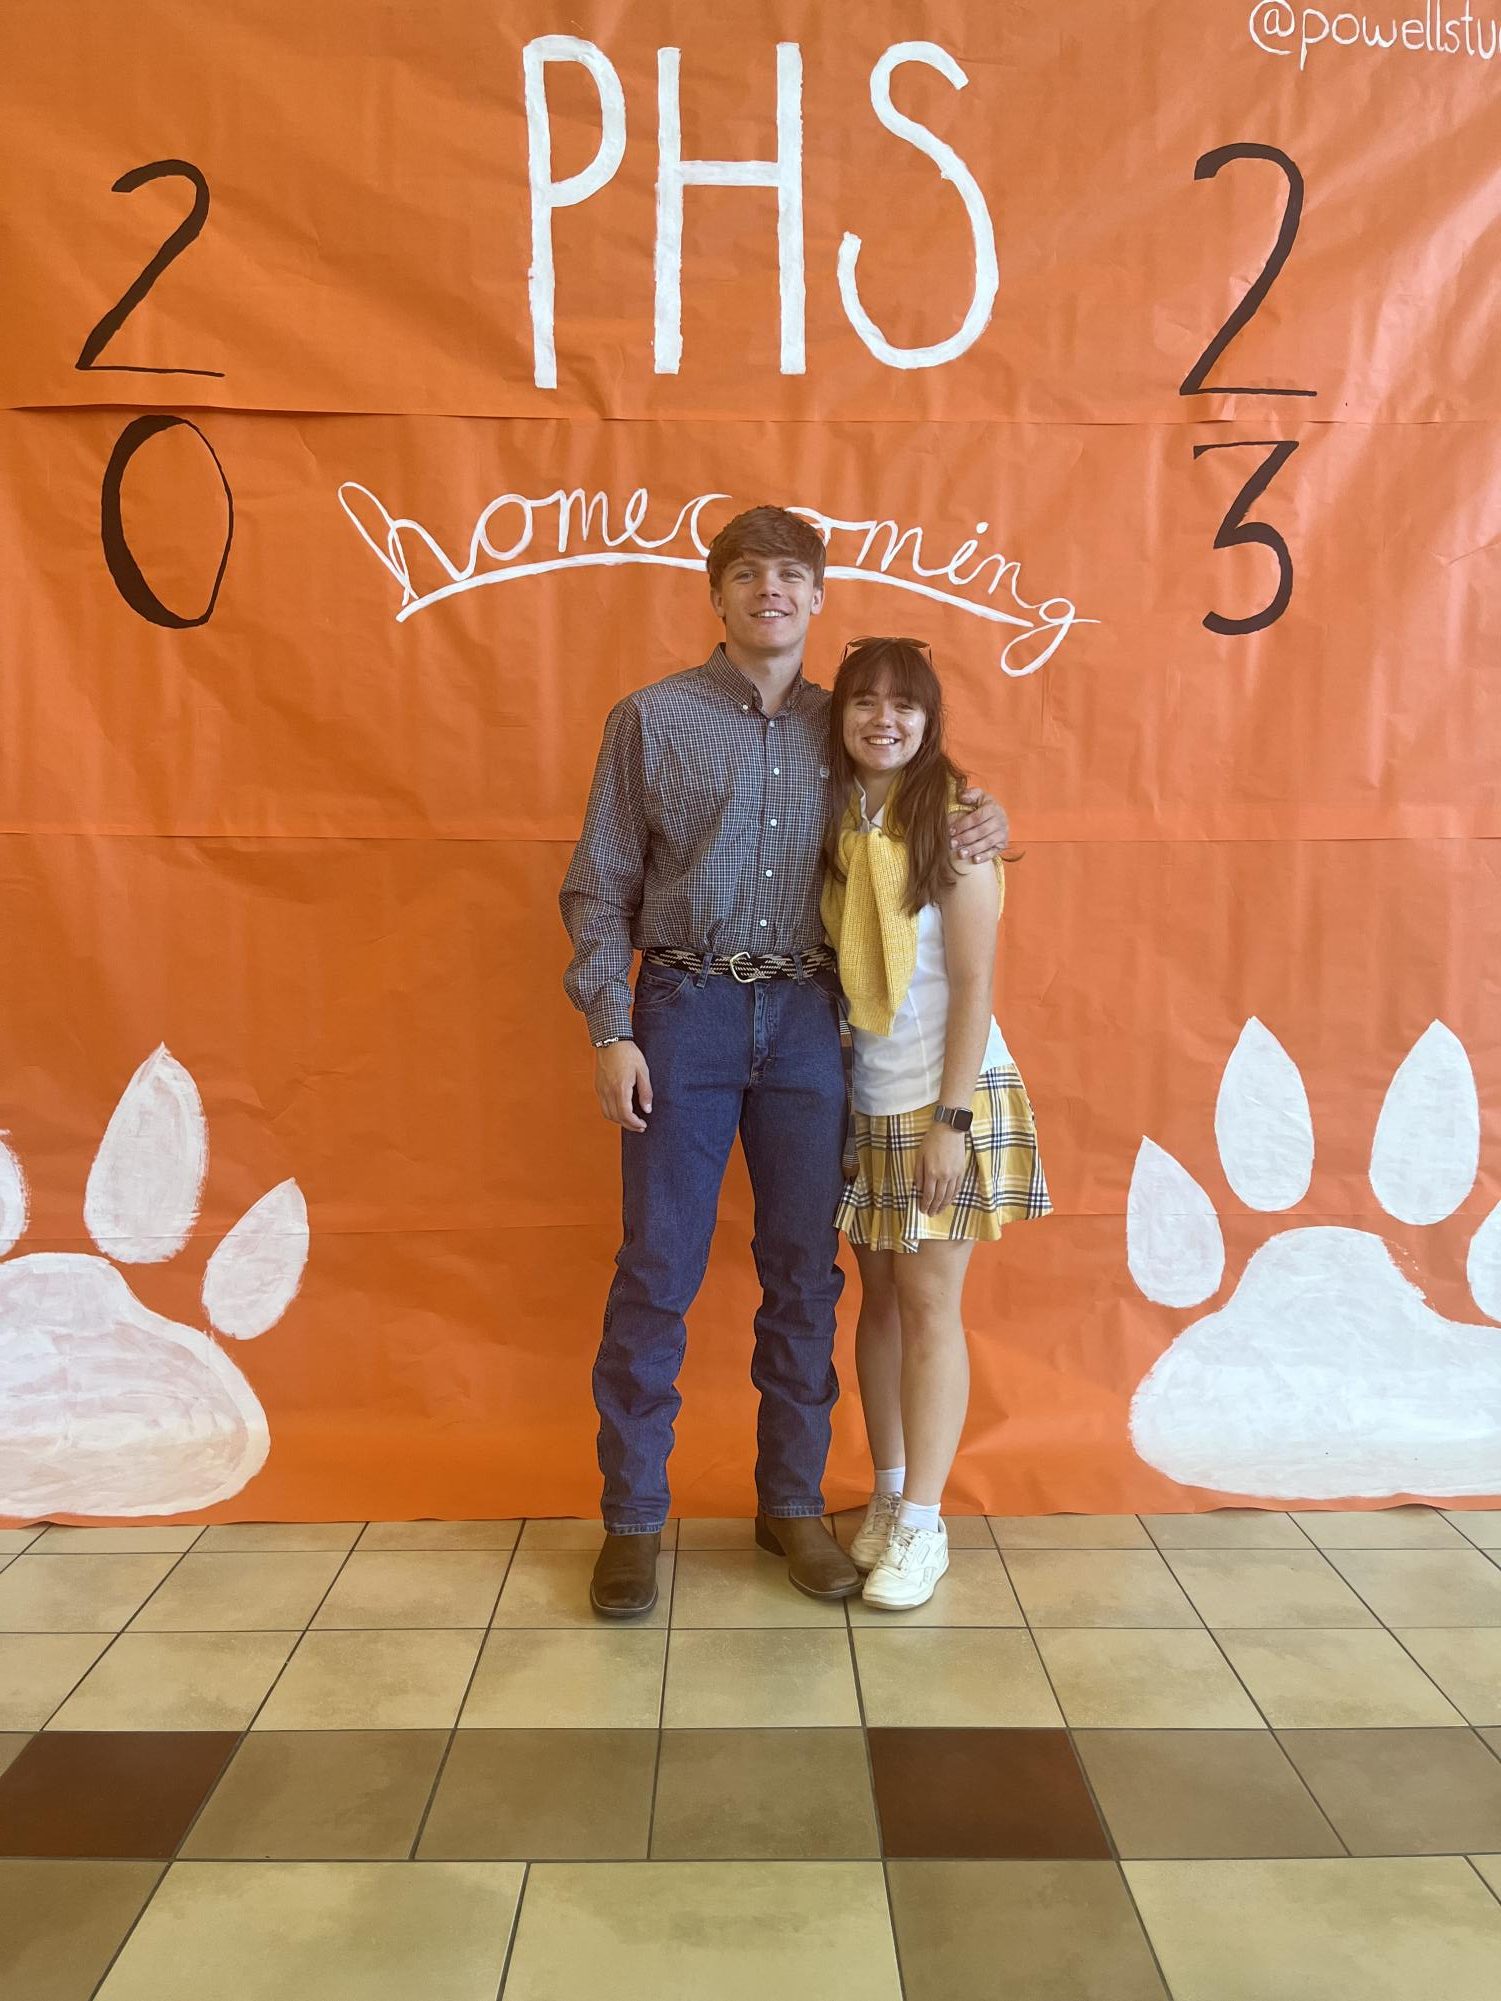 Senior Co-Presidents Jimmy Dees and Emma Johnson display their Panther Pride for Country VS Country club dressup day.